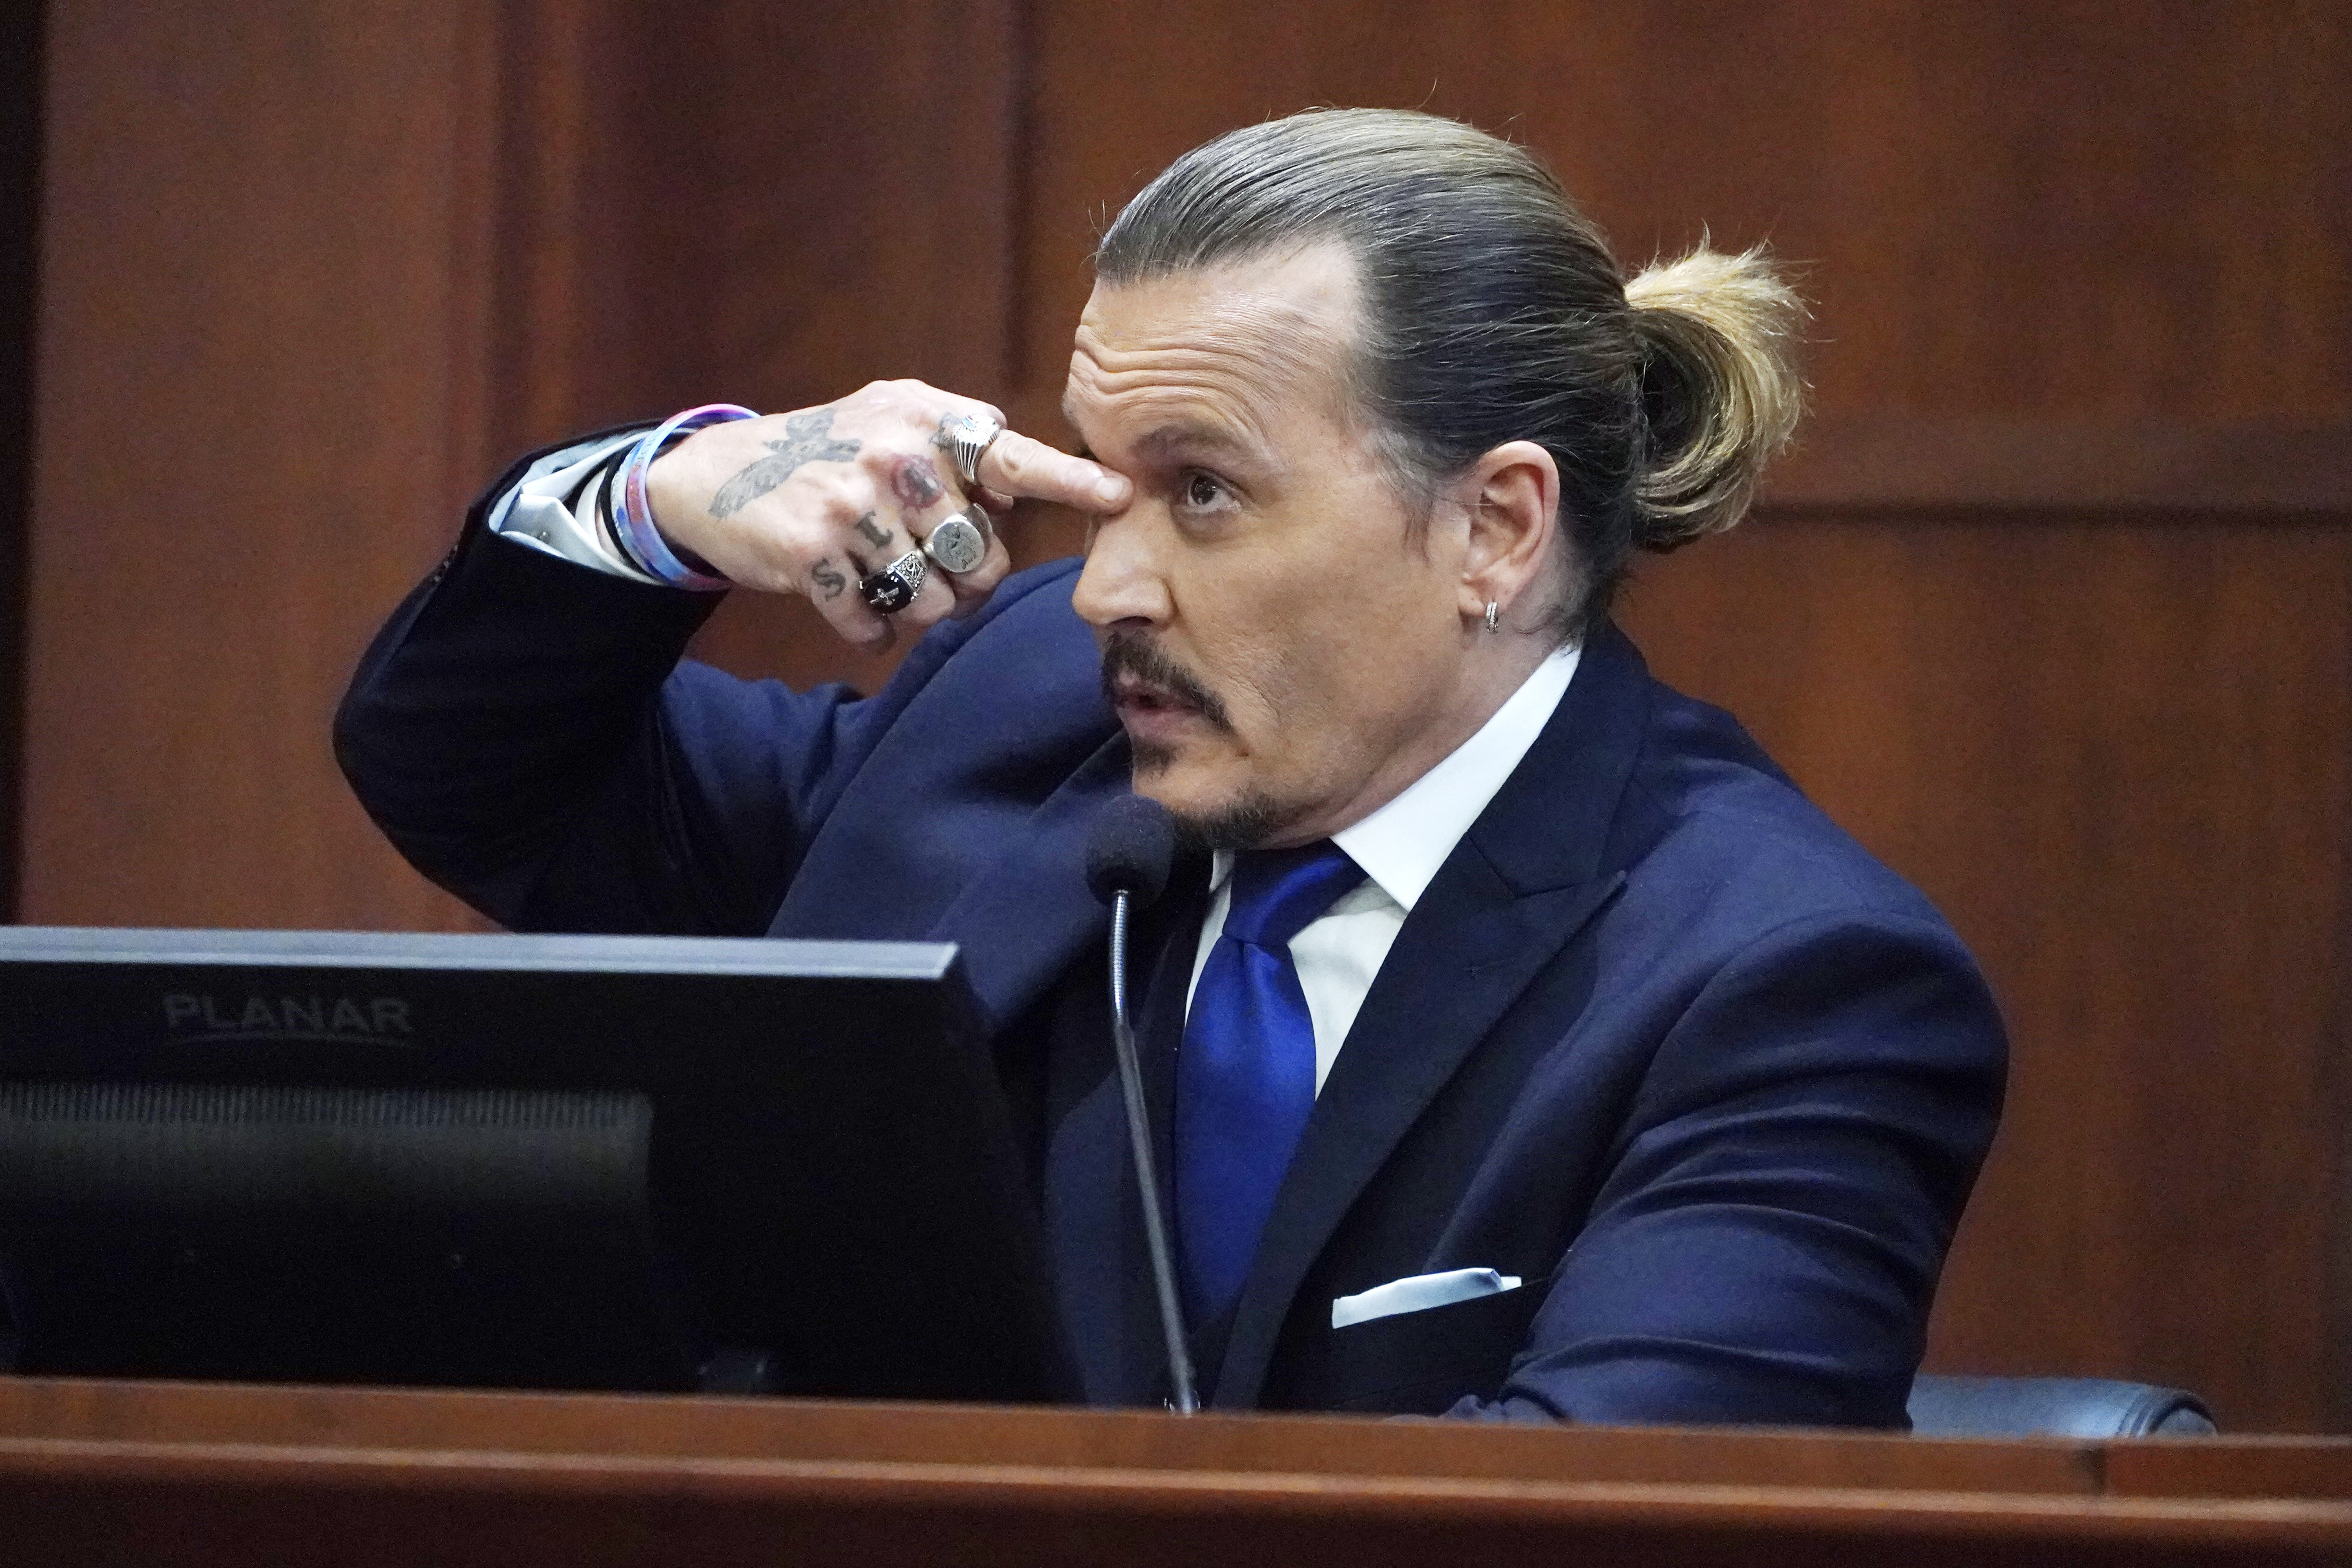 Actor Johnny Depp testifies that a can of mineral spirits actress Amber Heard through, hit him there, in the courtroom at the Fairfax County Circuit Courthouse in Fairfax, Virginia, April 25, 2022. - Actor Johnny Depp sued his ex-wife Amber Heard for libel in Fairfax County Circuit Court after she wrote an op-ed piece in The Washington Post in 2018 referring to herself as a "public figure representing domestic abuse." (Photo by Steve Helber / POOL / AFP)